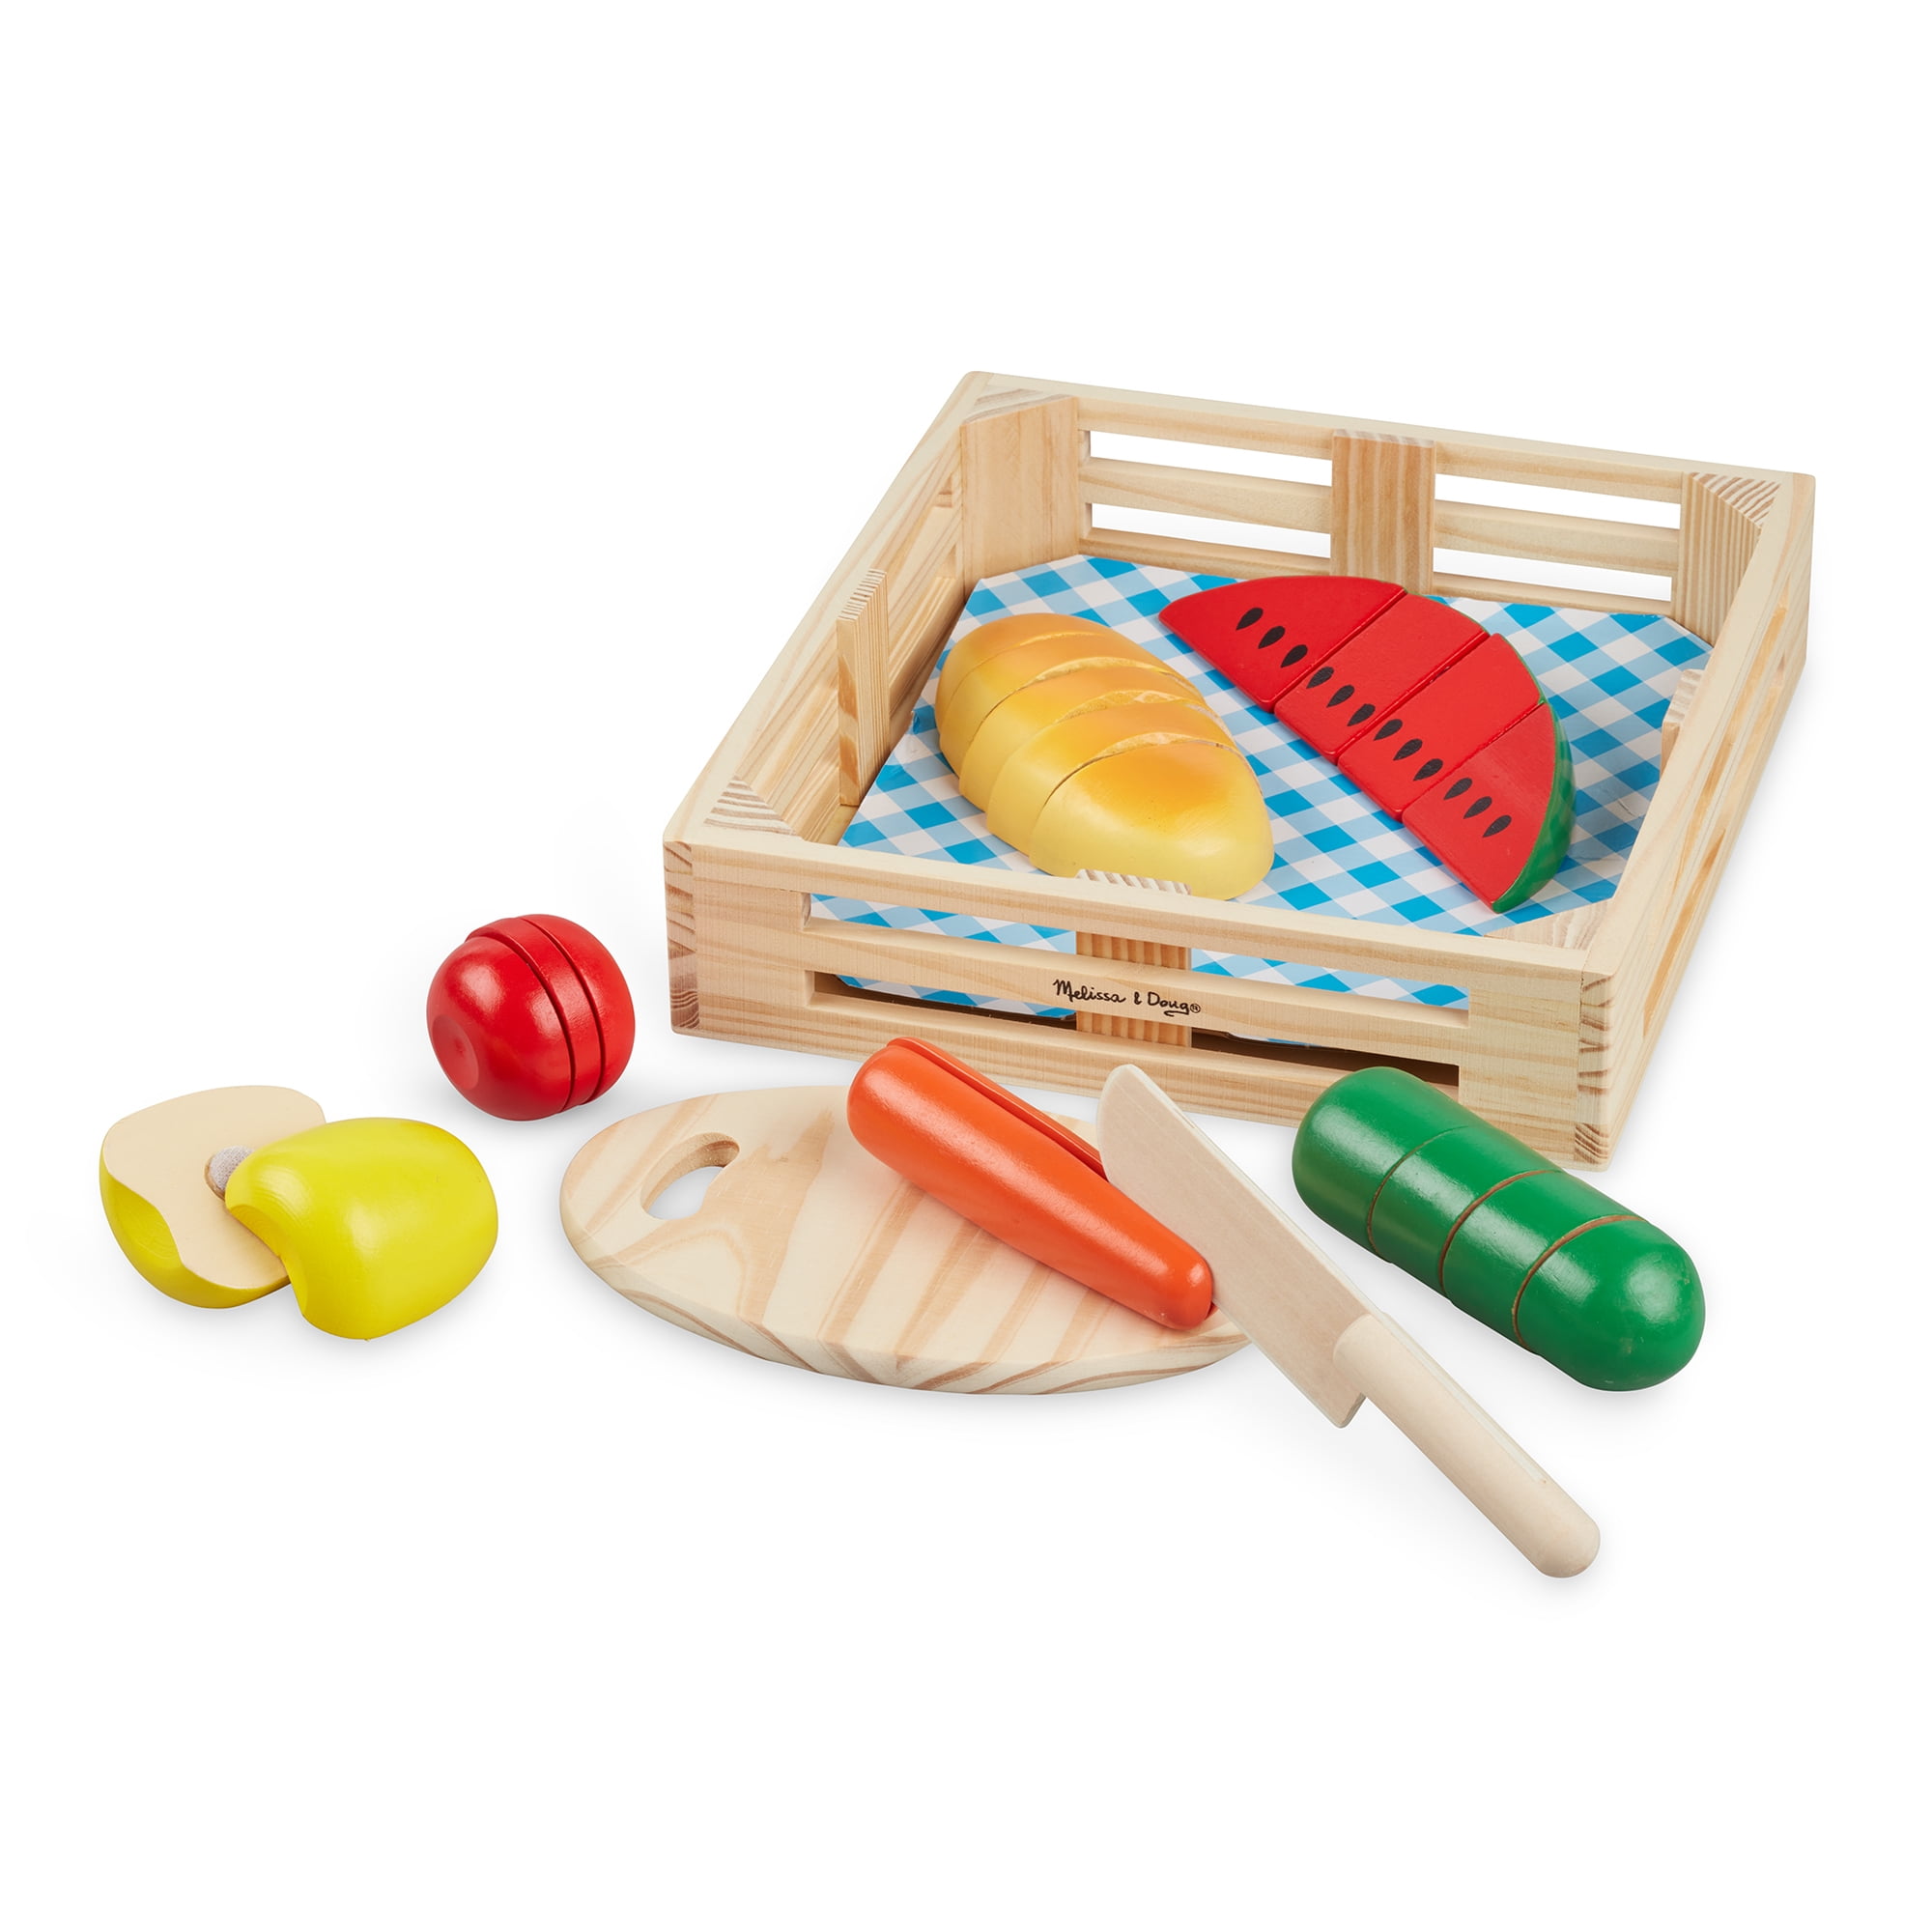 role play Wooden Play Food Pretend play mixed fruit in a wooden crate 